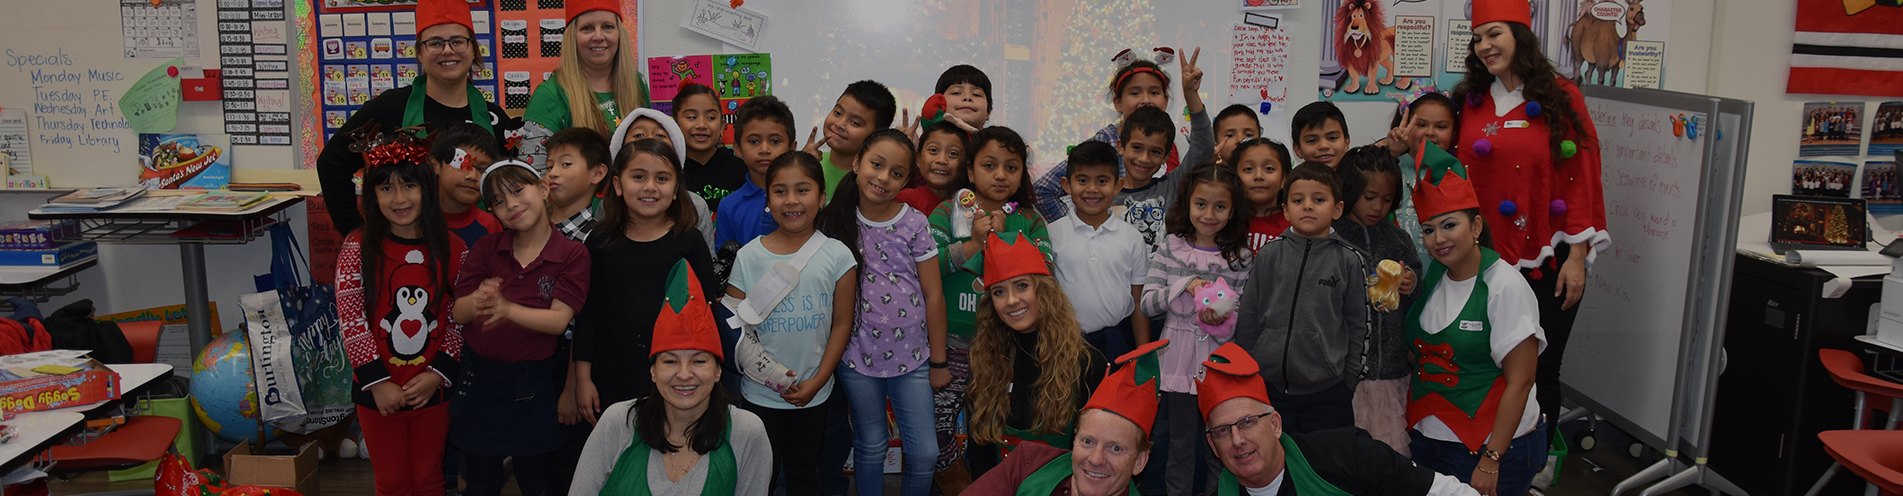 A group of happy children and volunteers in elf outfits in a classroom